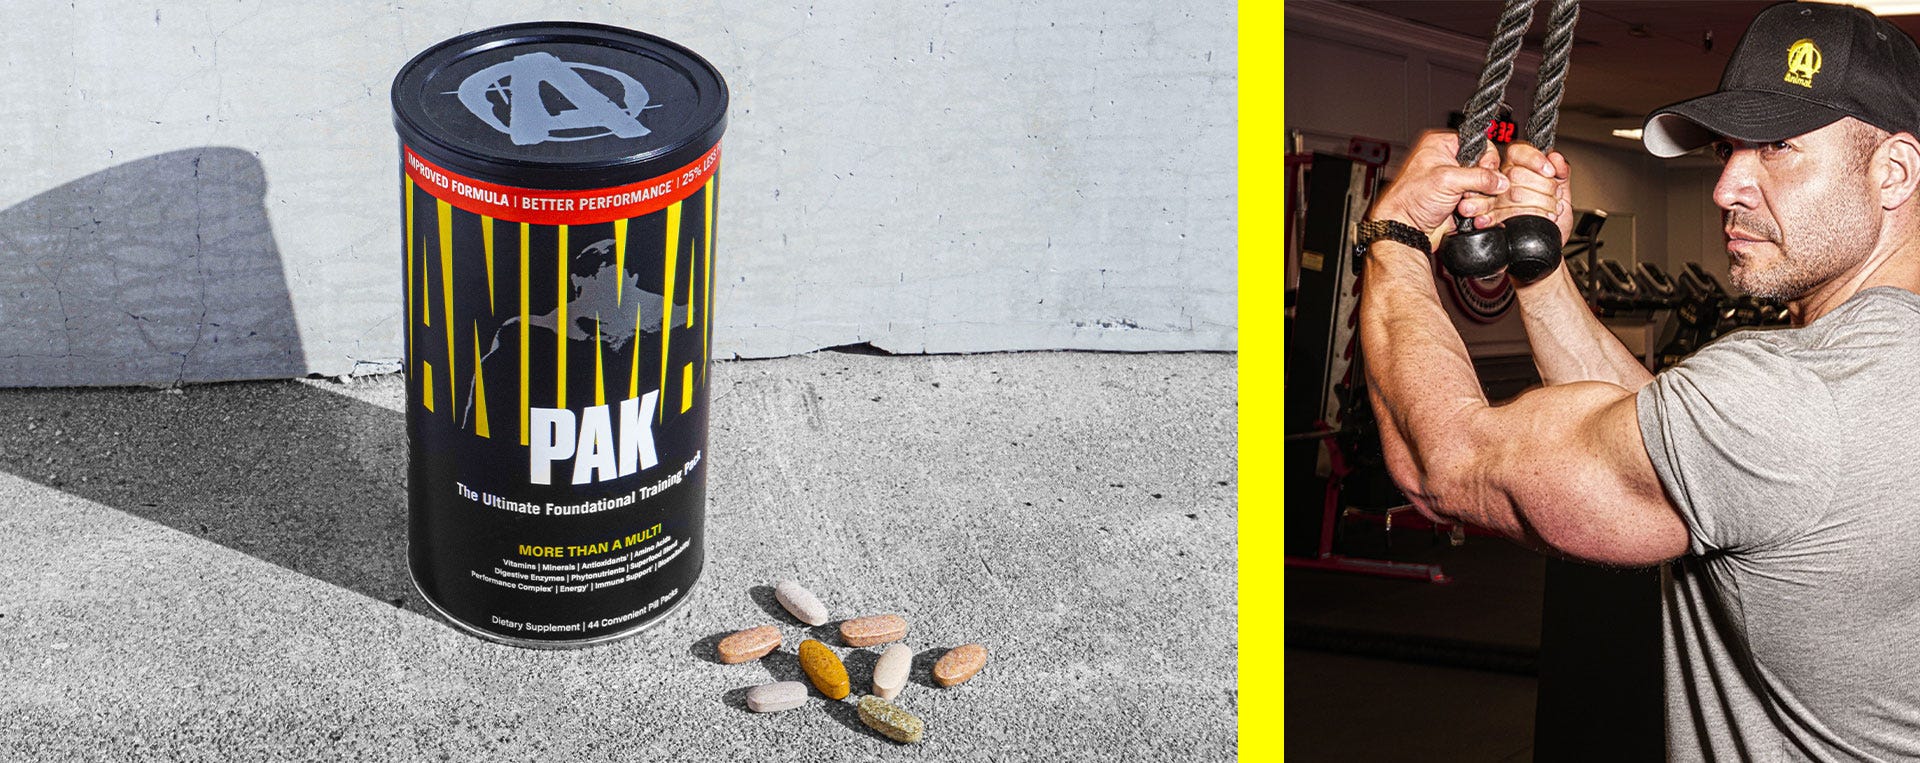 Legendary Animal Pak drops to eight pills with an improved formula